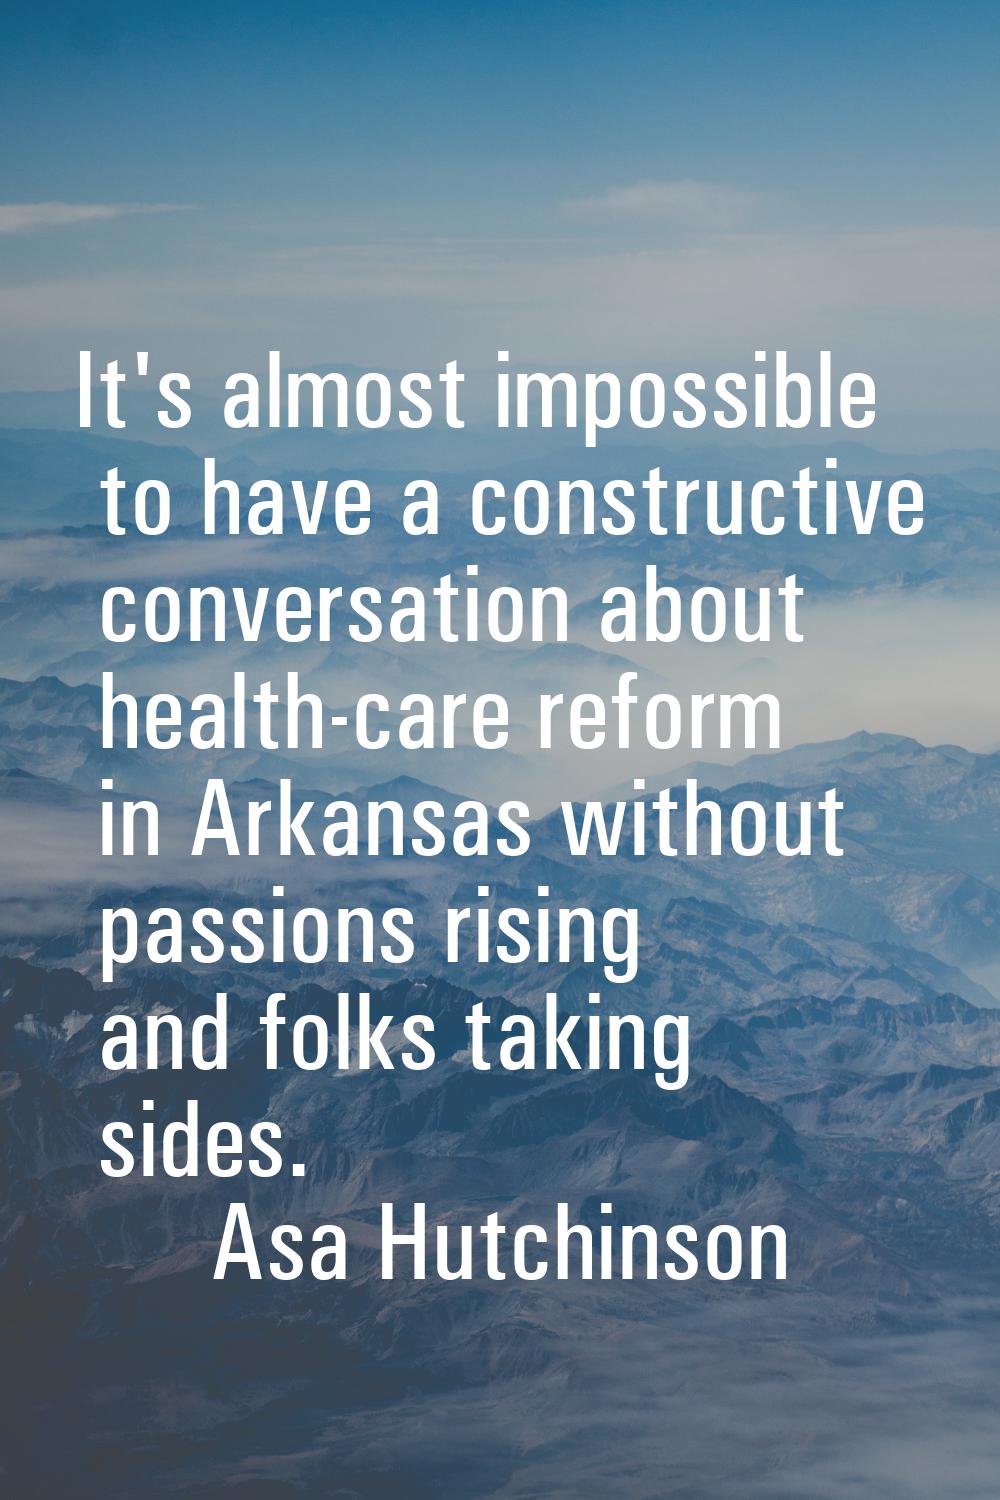 It's almost impossible to have a constructive conversation about health-care reform in Arkansas wit